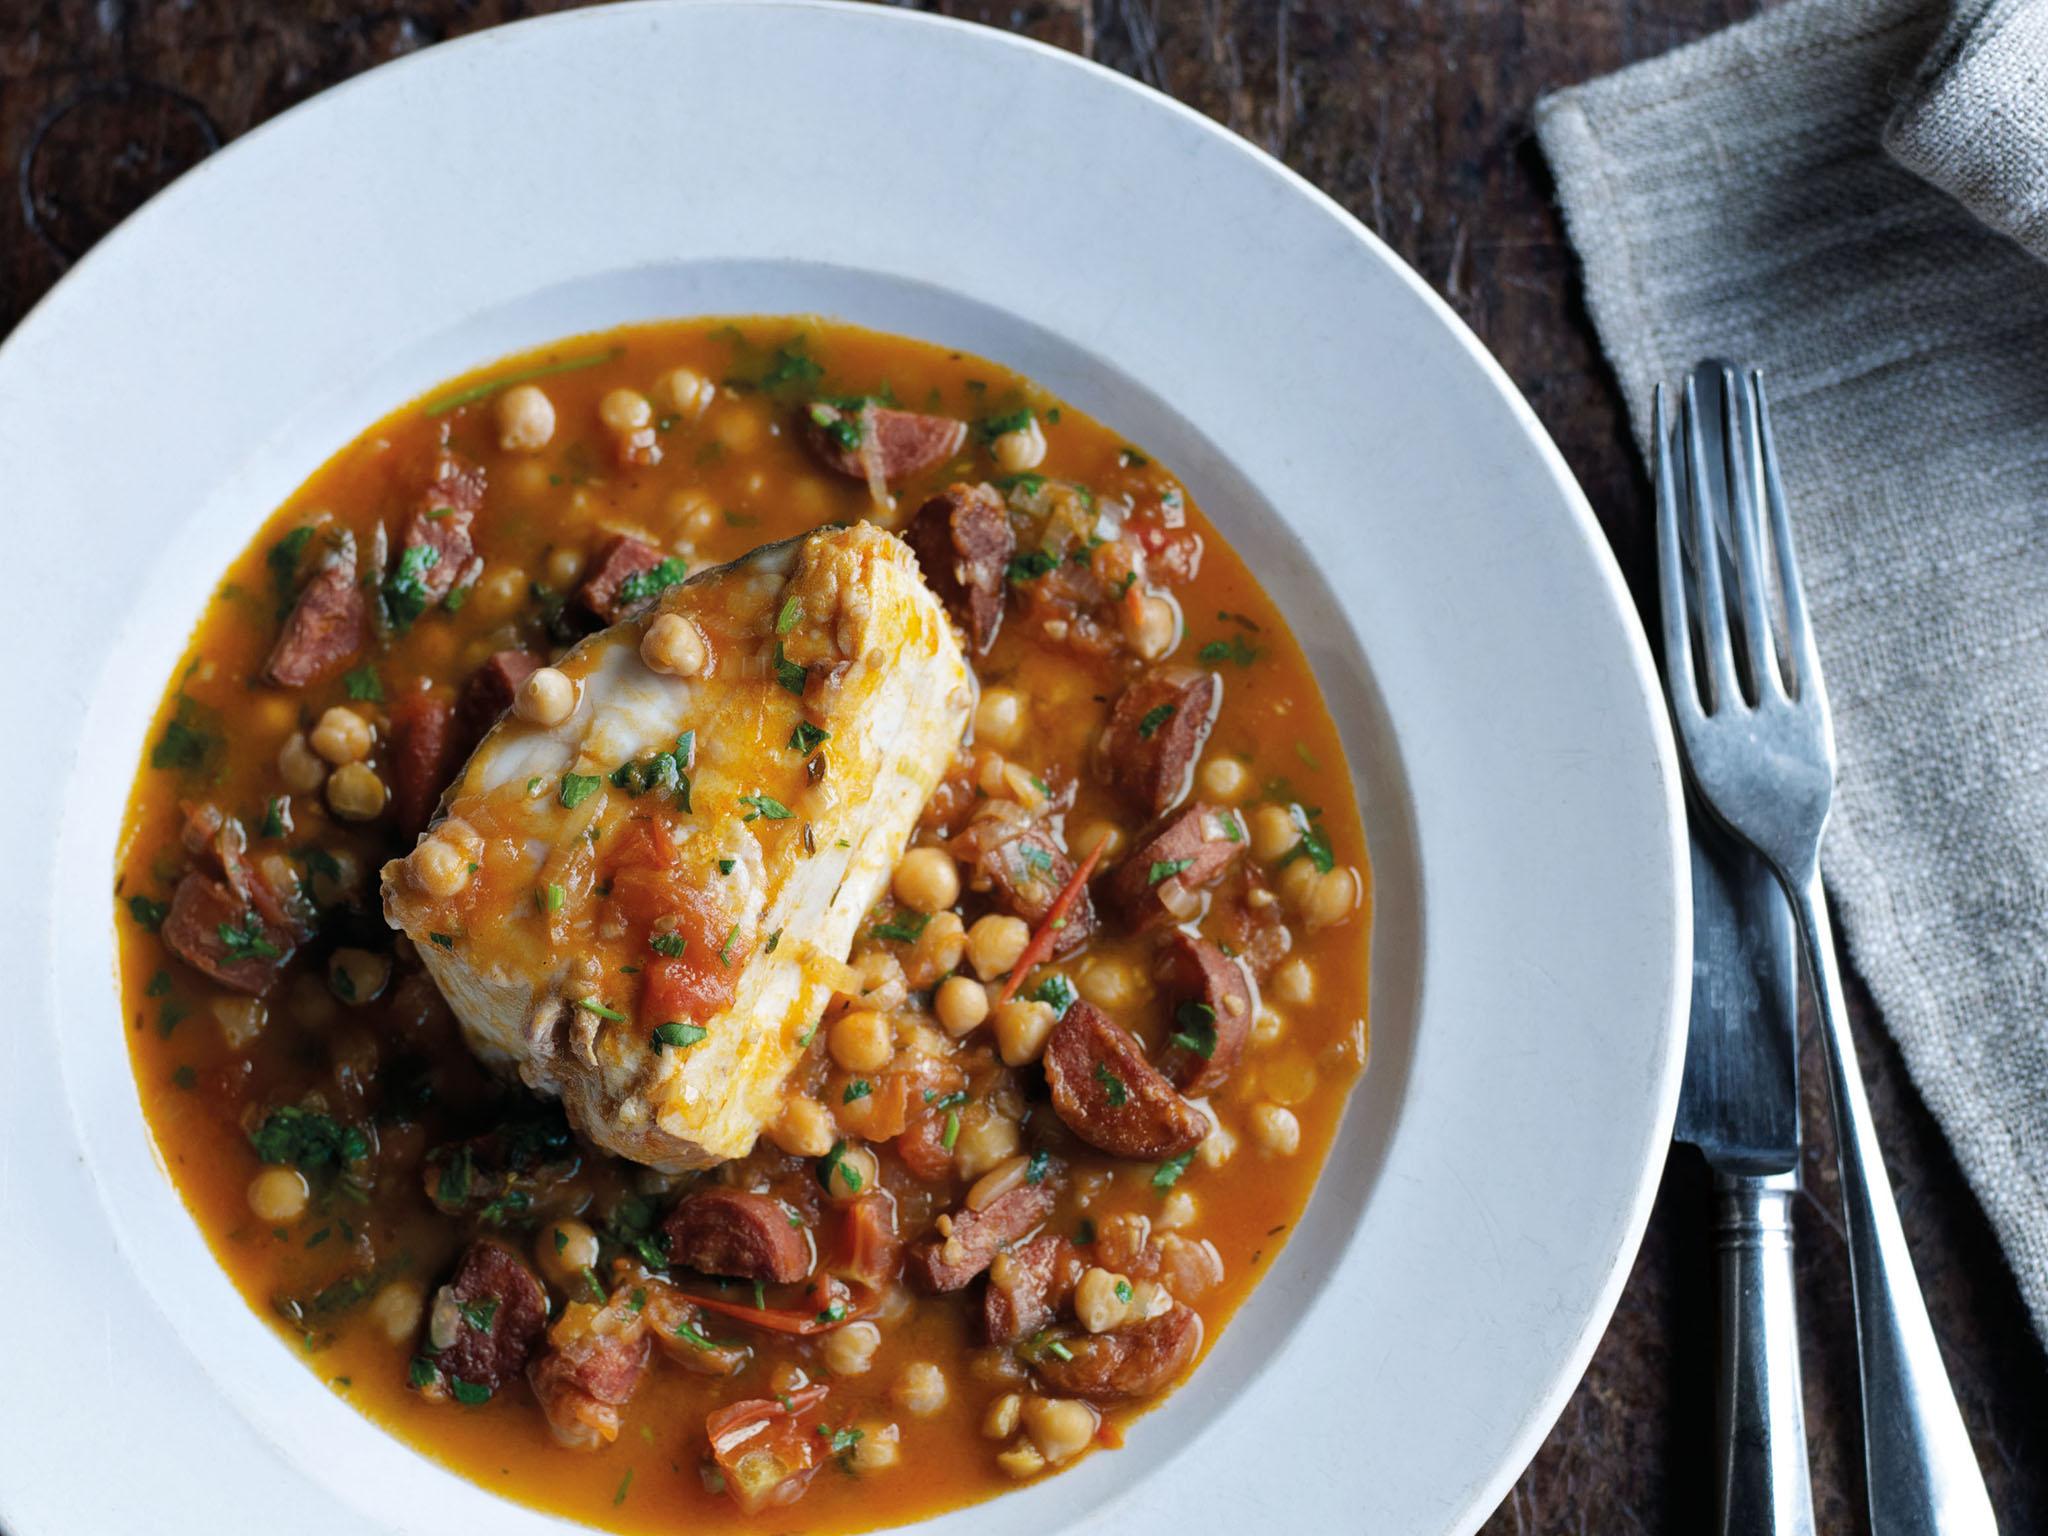 Chick peas and chorizo are an unlikely but brill complement to halibut fillet